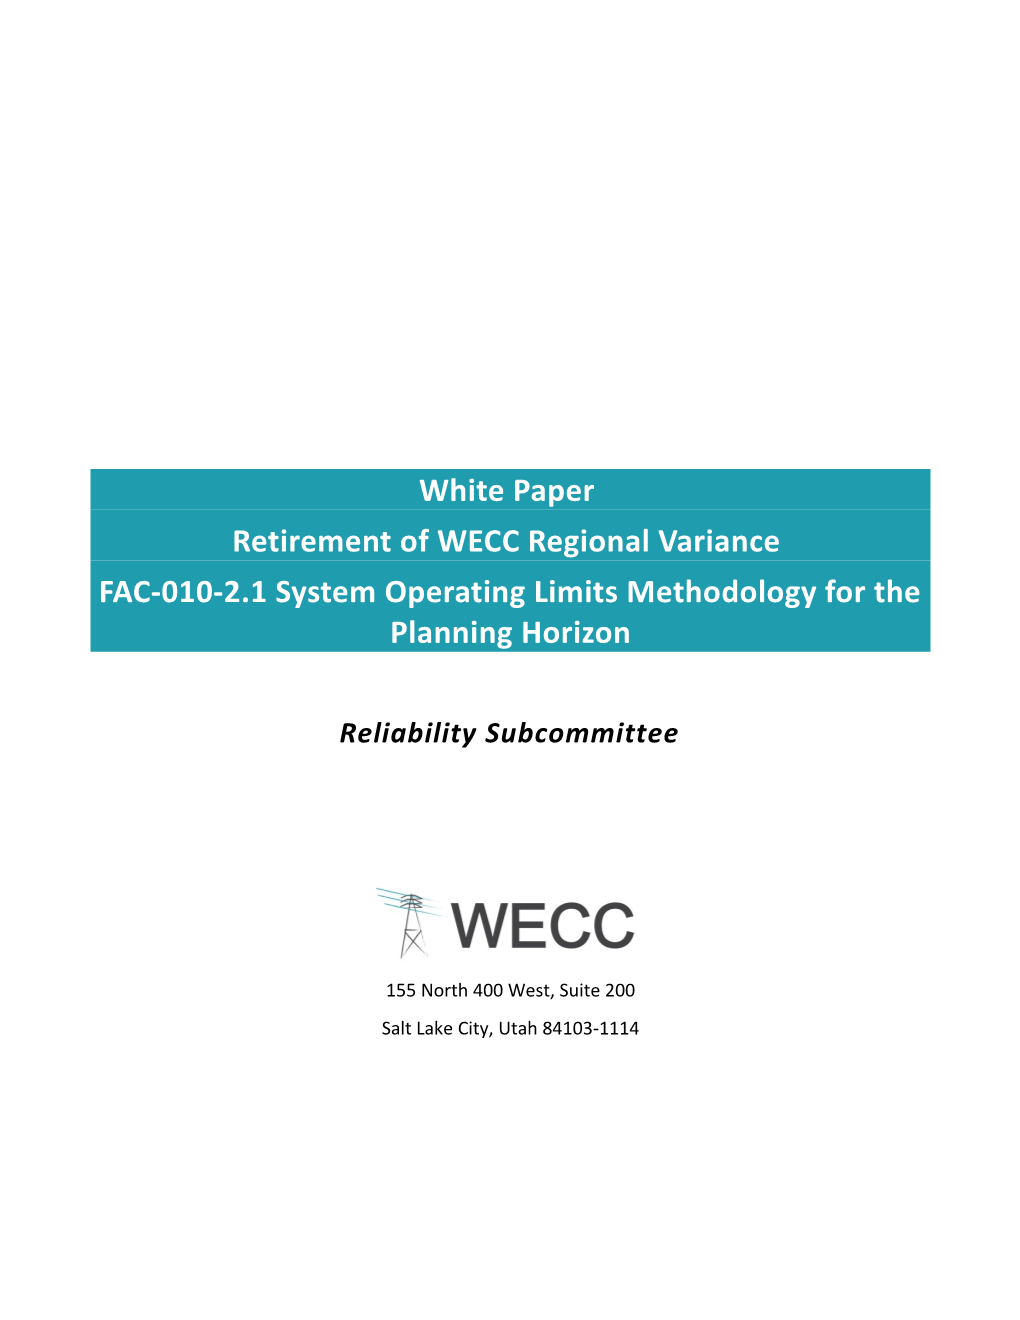 FAC-010-2 1 System Operating Limits Methodology for the Planning Horizon White Paper To